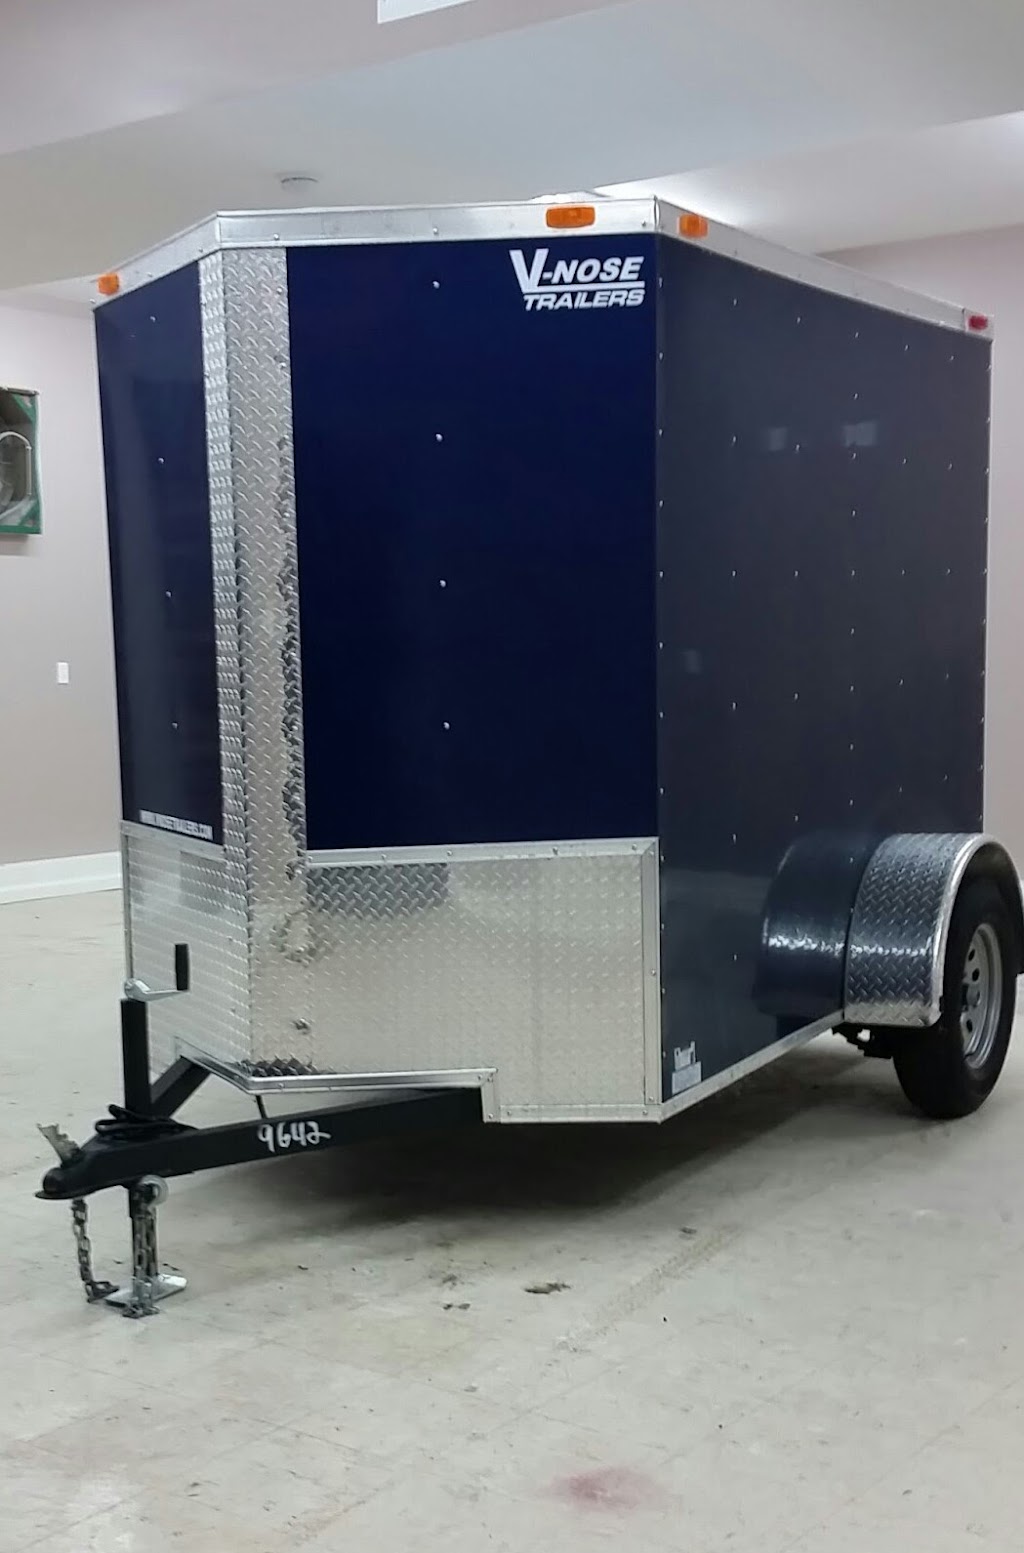 VNOSE TRAILERS | 294 ROUTE 211 WEST, 294 Monhagen Avenue, Middletown, NY 10940 | Phone: (845) 775-4198